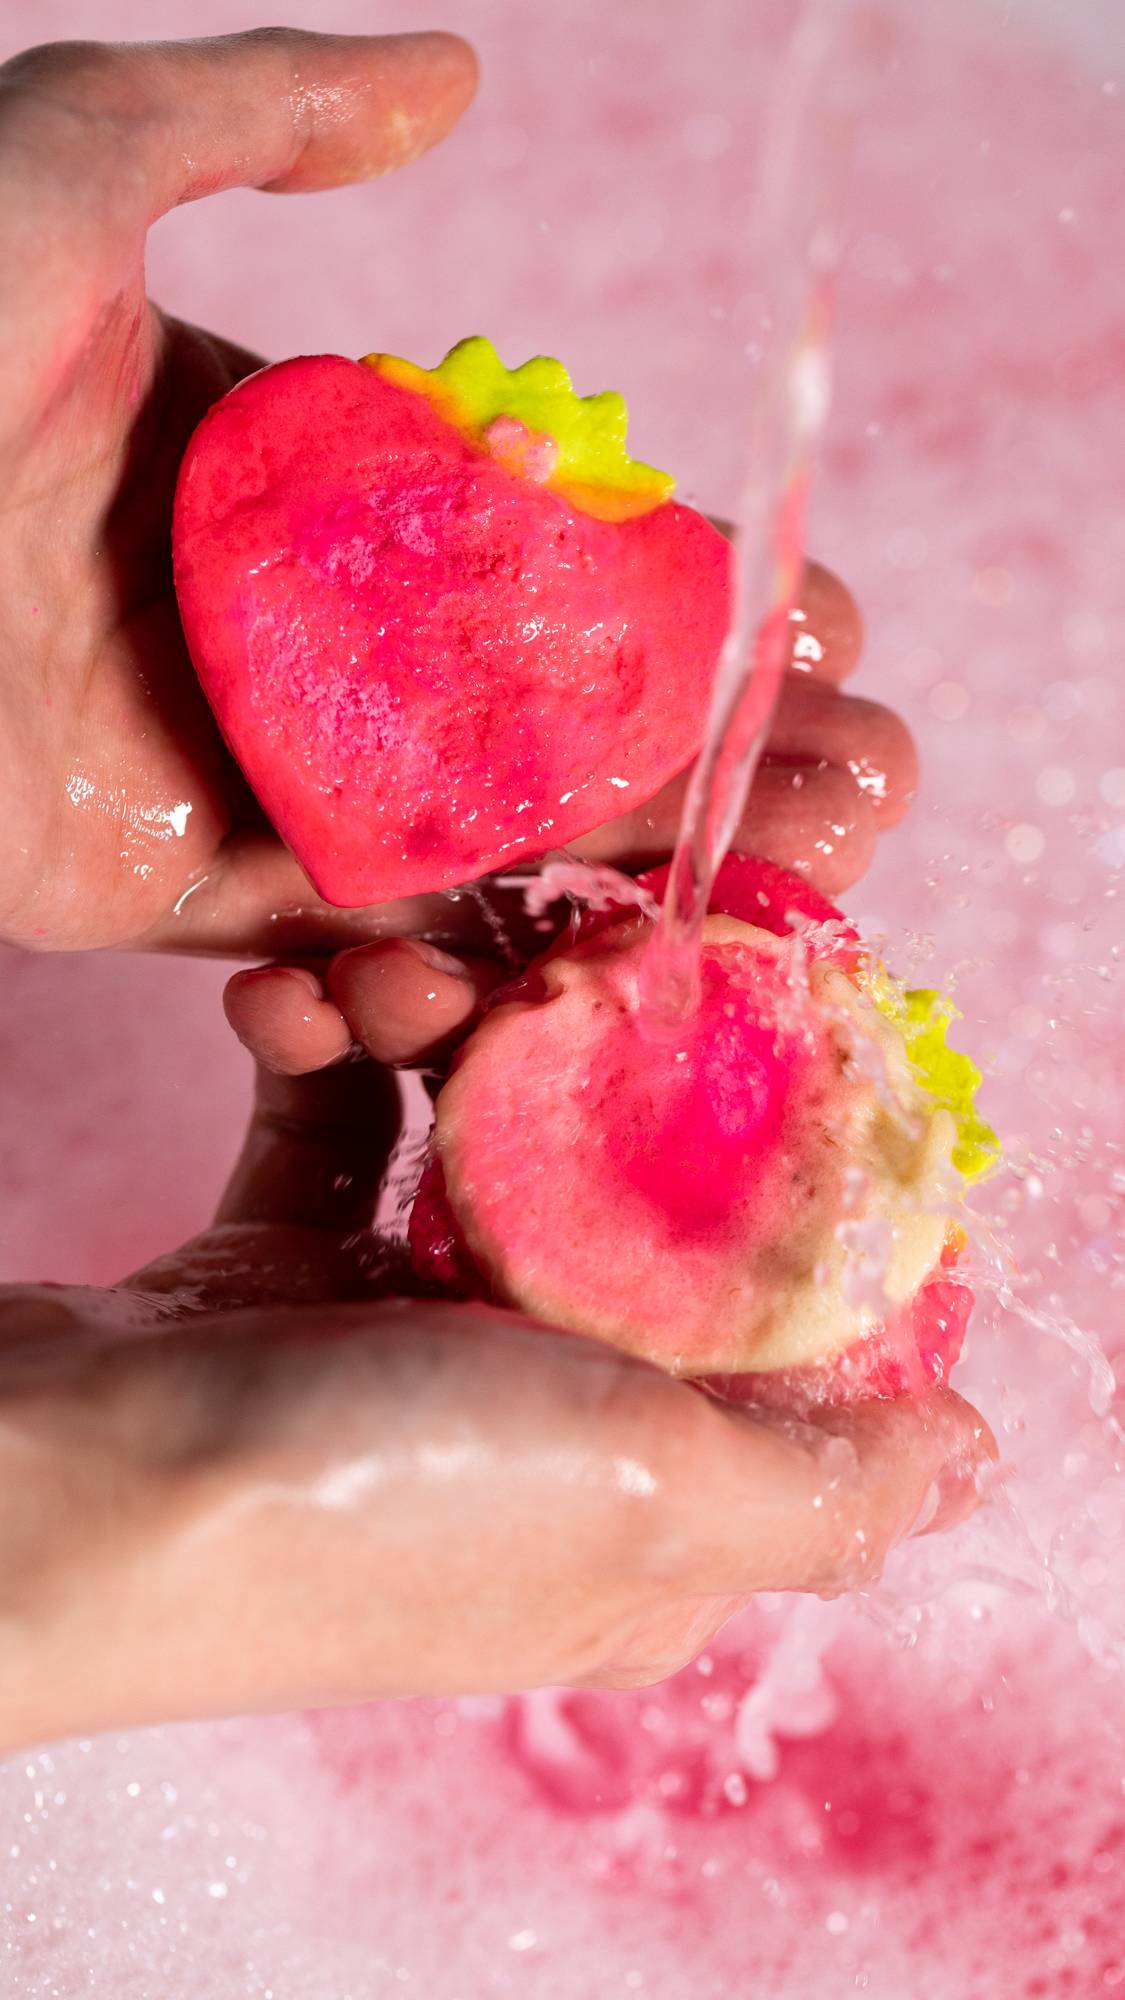 The image shows a close-up of the model who has broken the bubble bar in half and is holding both halves under running water.